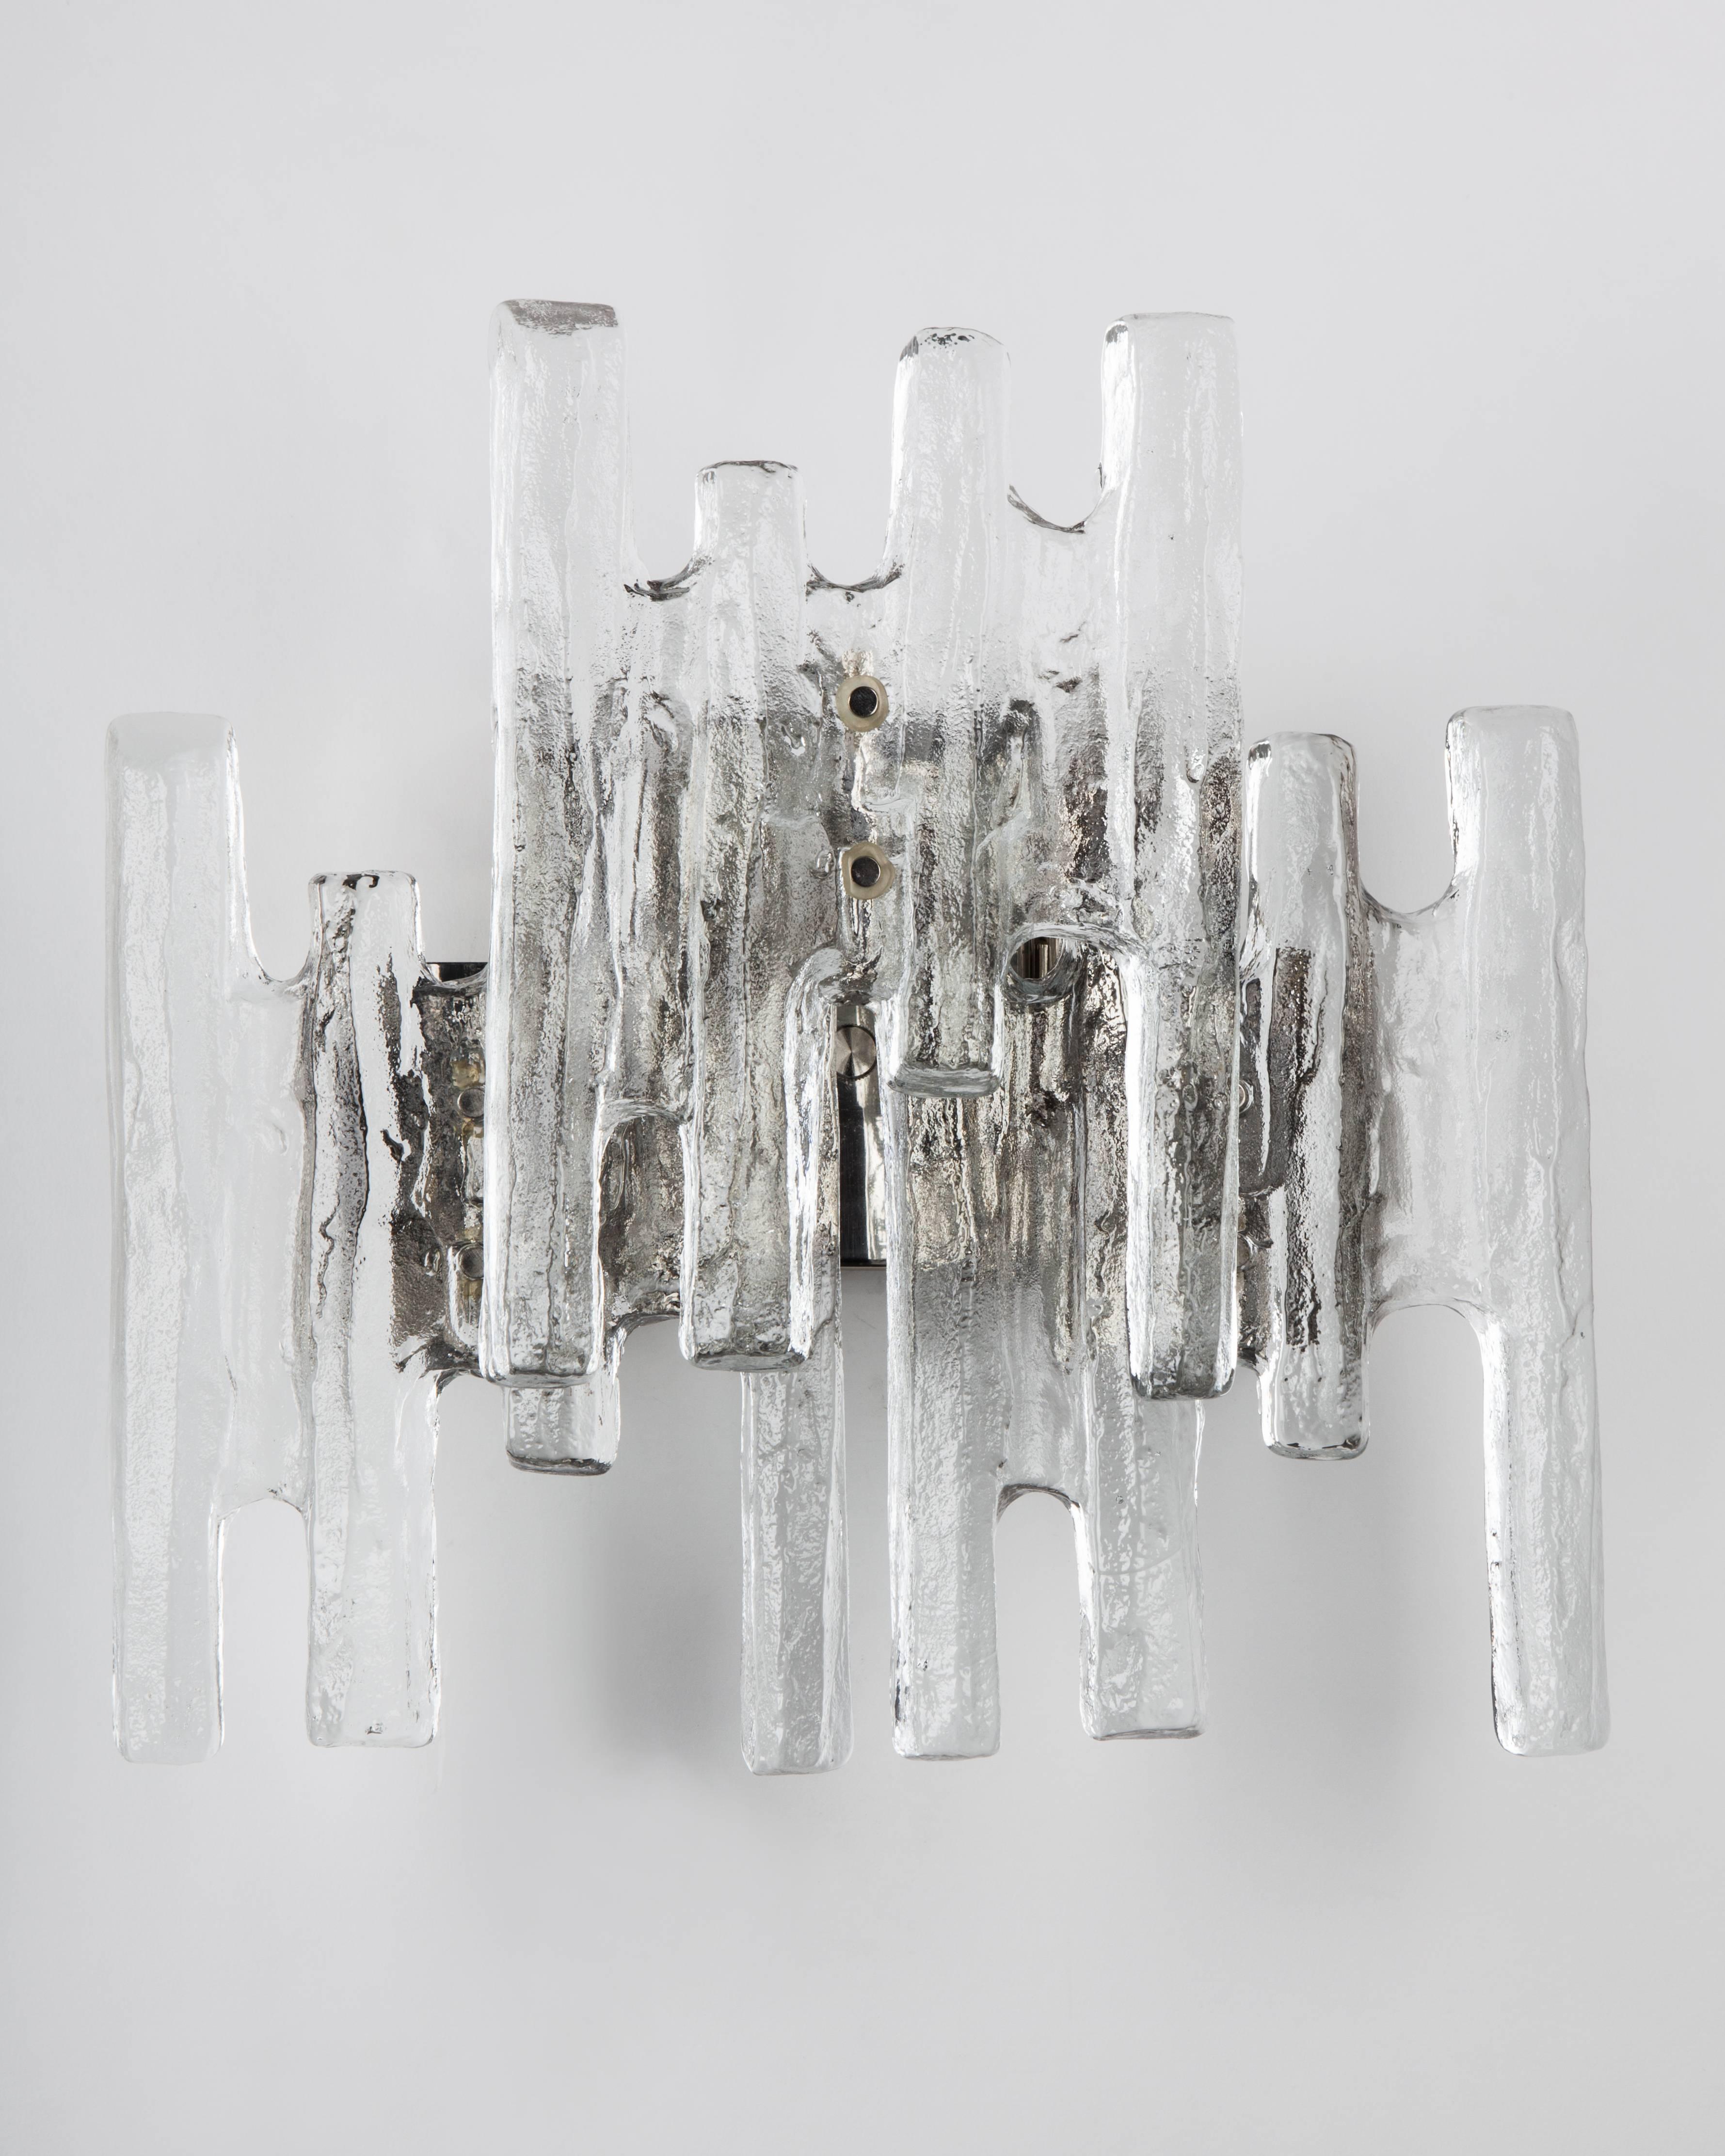 AIS2983,
a vintage sconce with three textured cast glass ice-style prisms on a nickel frame. Signed by the Austrian maker Kalmar. Due to the antique nature of this fixture, there may be some nicks or imperfections in the glass as well as variations